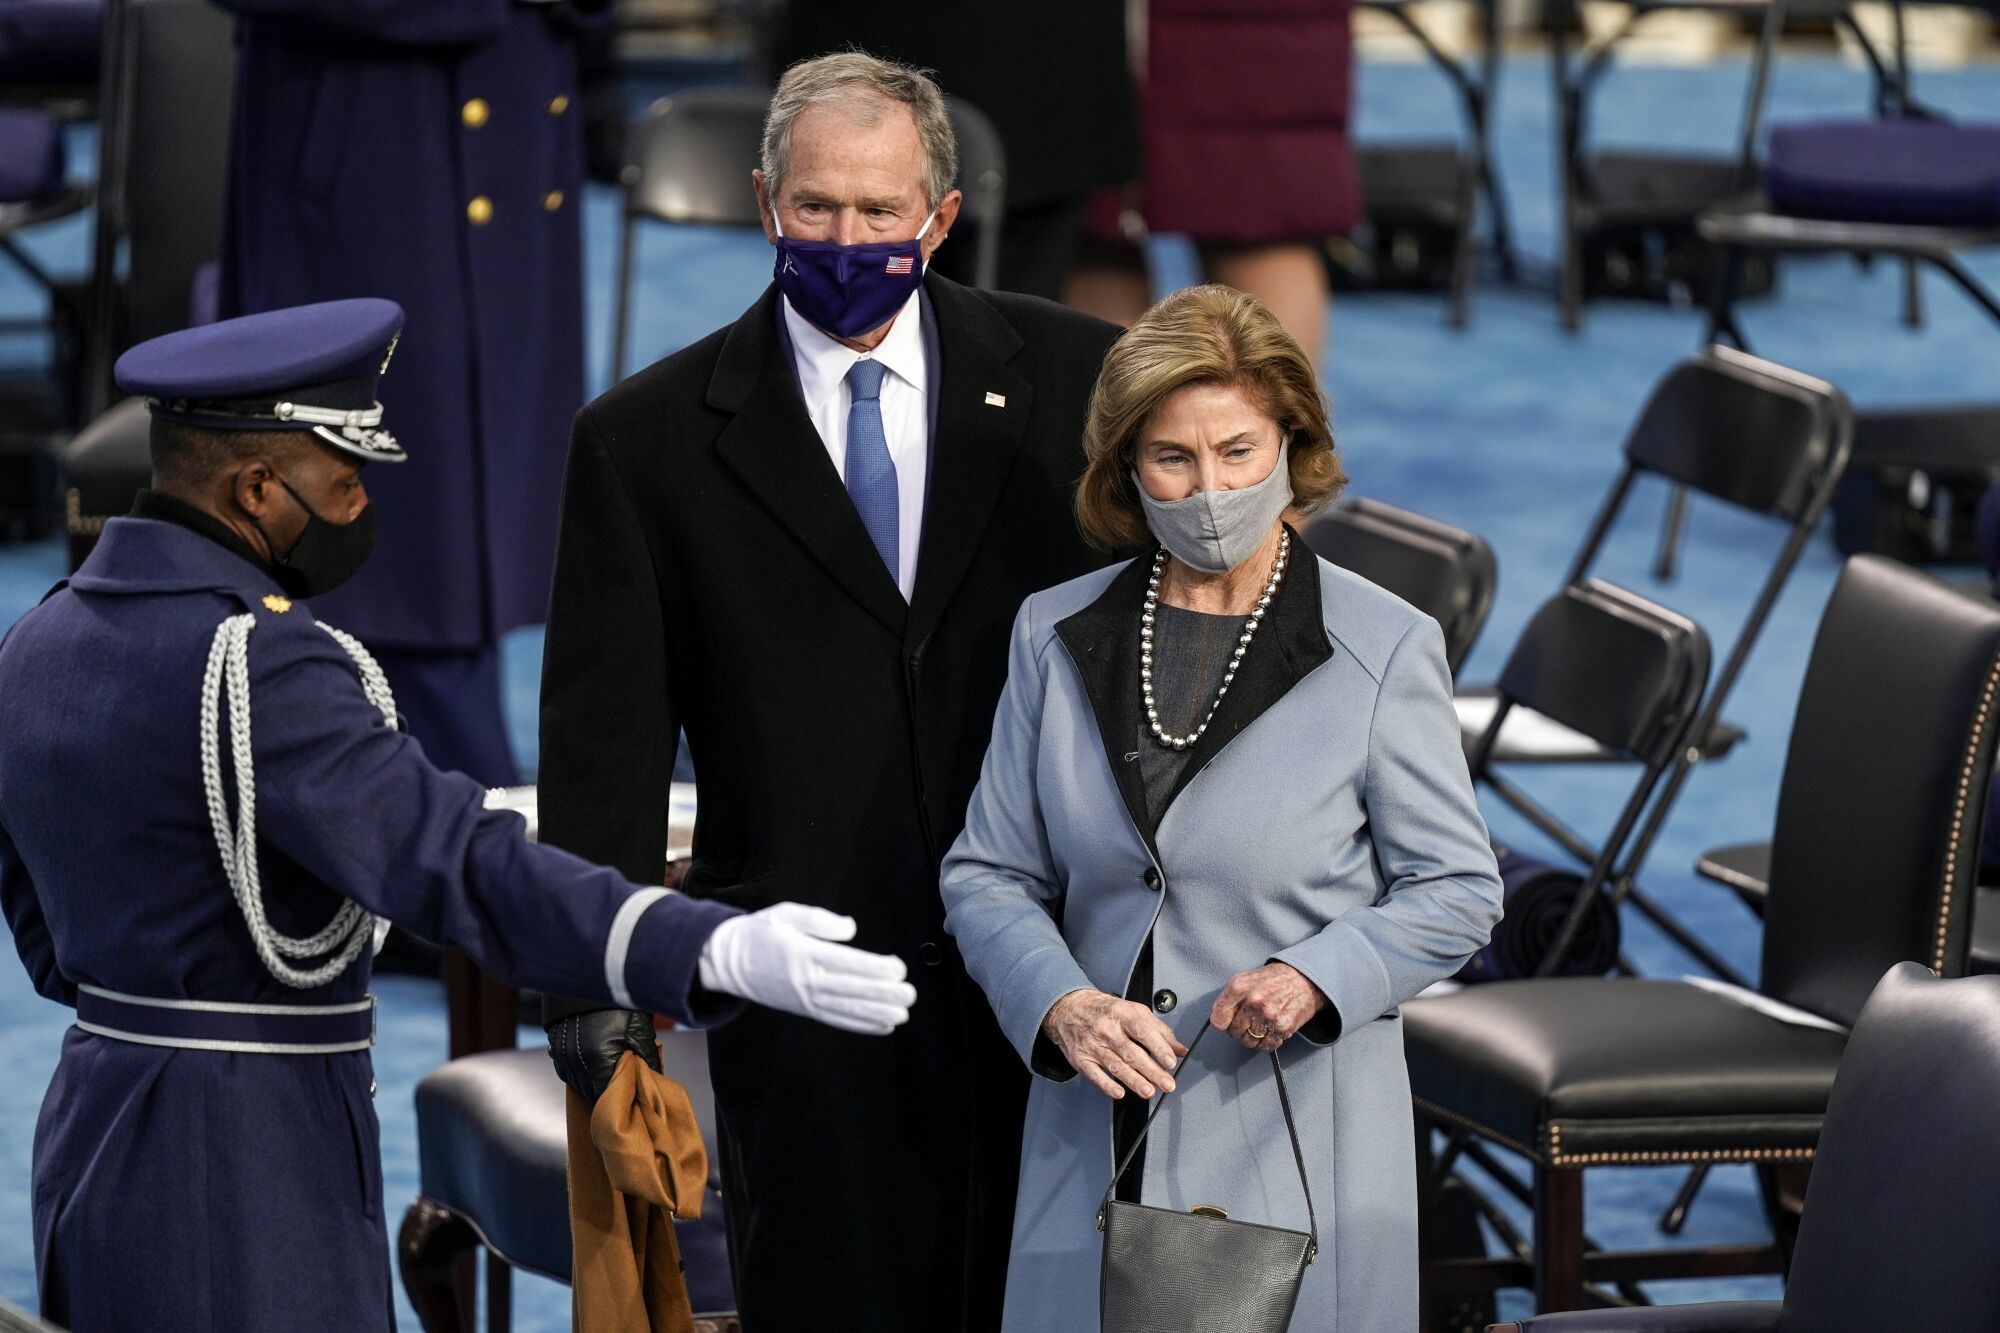 Former President George W. Bush and Laura Bush arrive at the inauguration of President Biden.